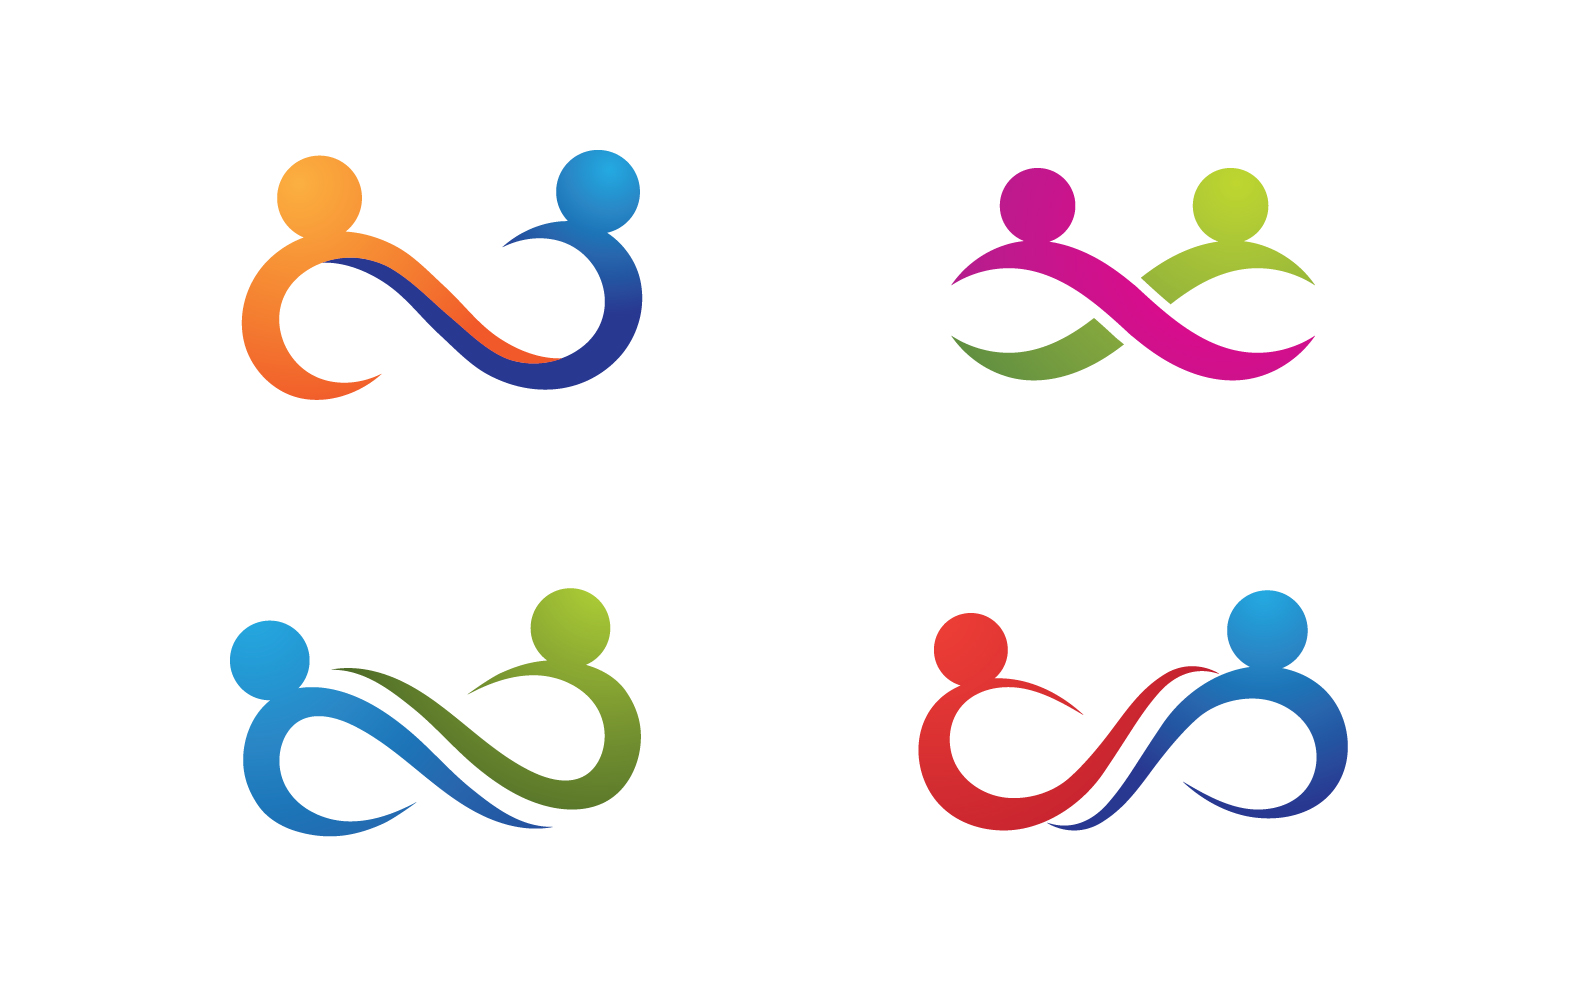 Infinity people team group logo design for company v3